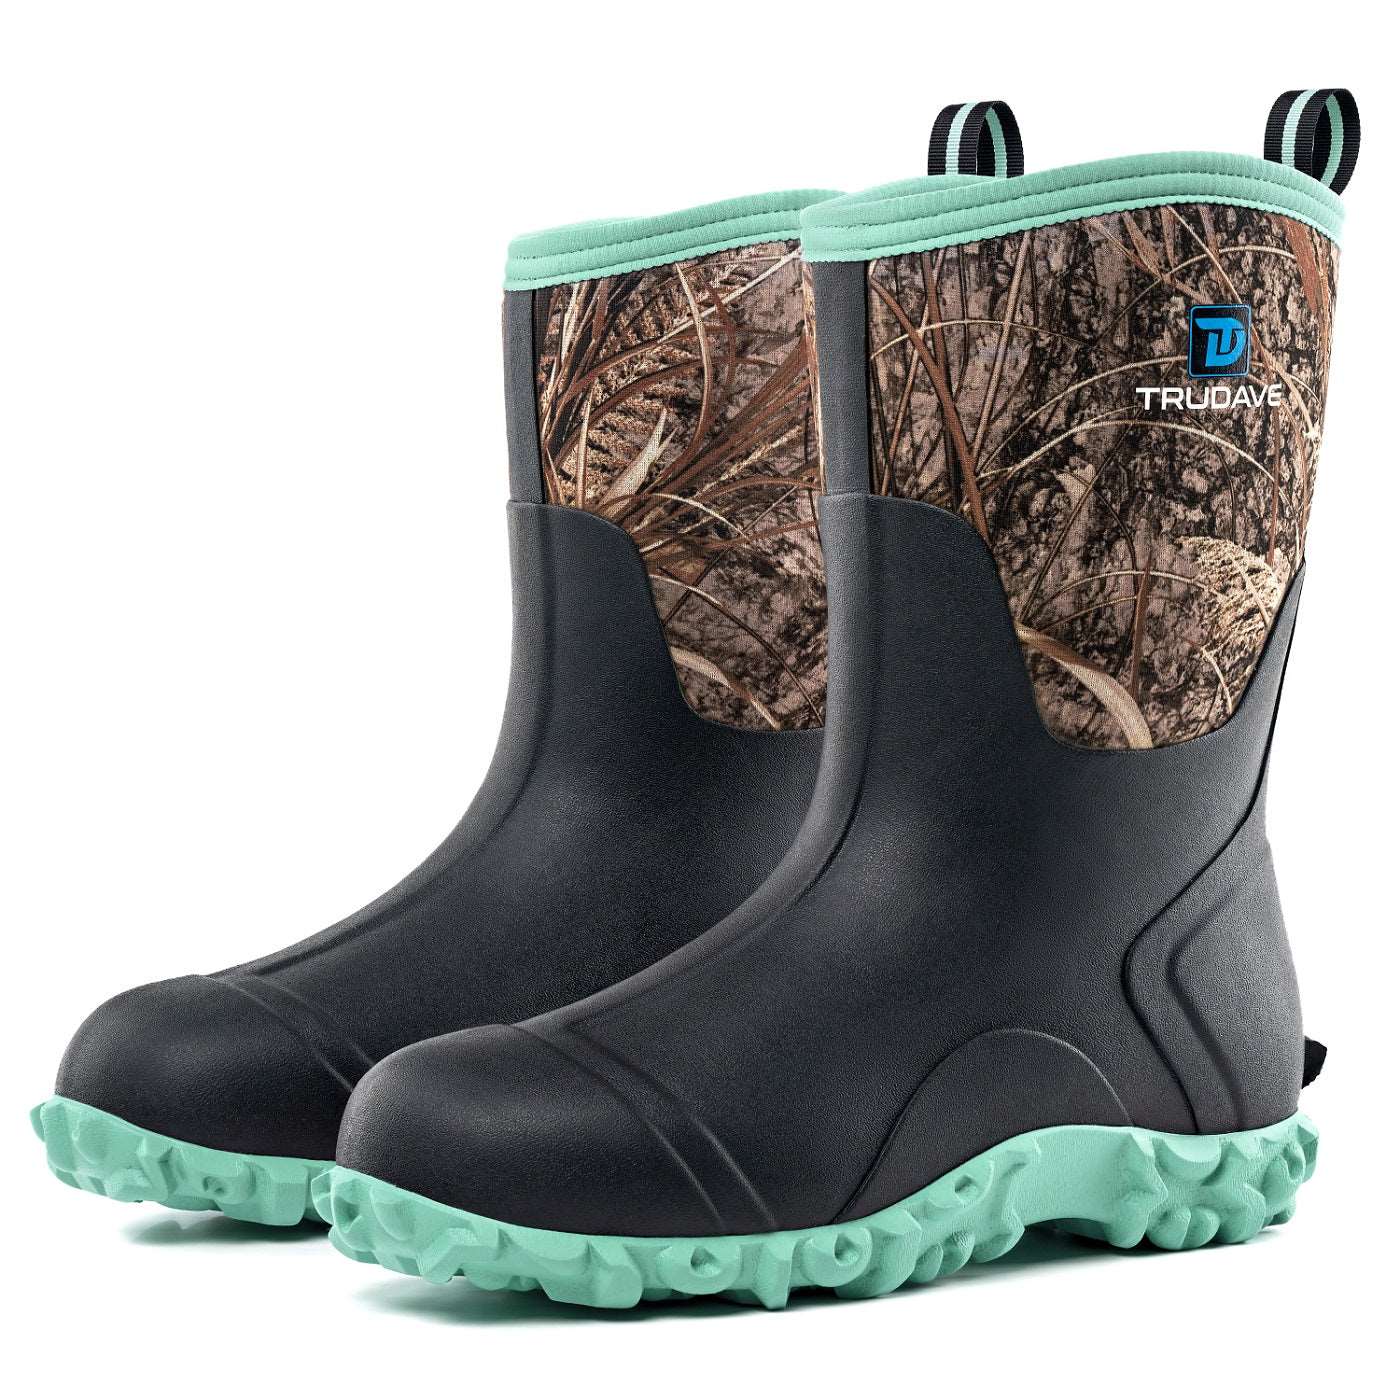 Trudave Green Camo Short Rubber Boots for Women